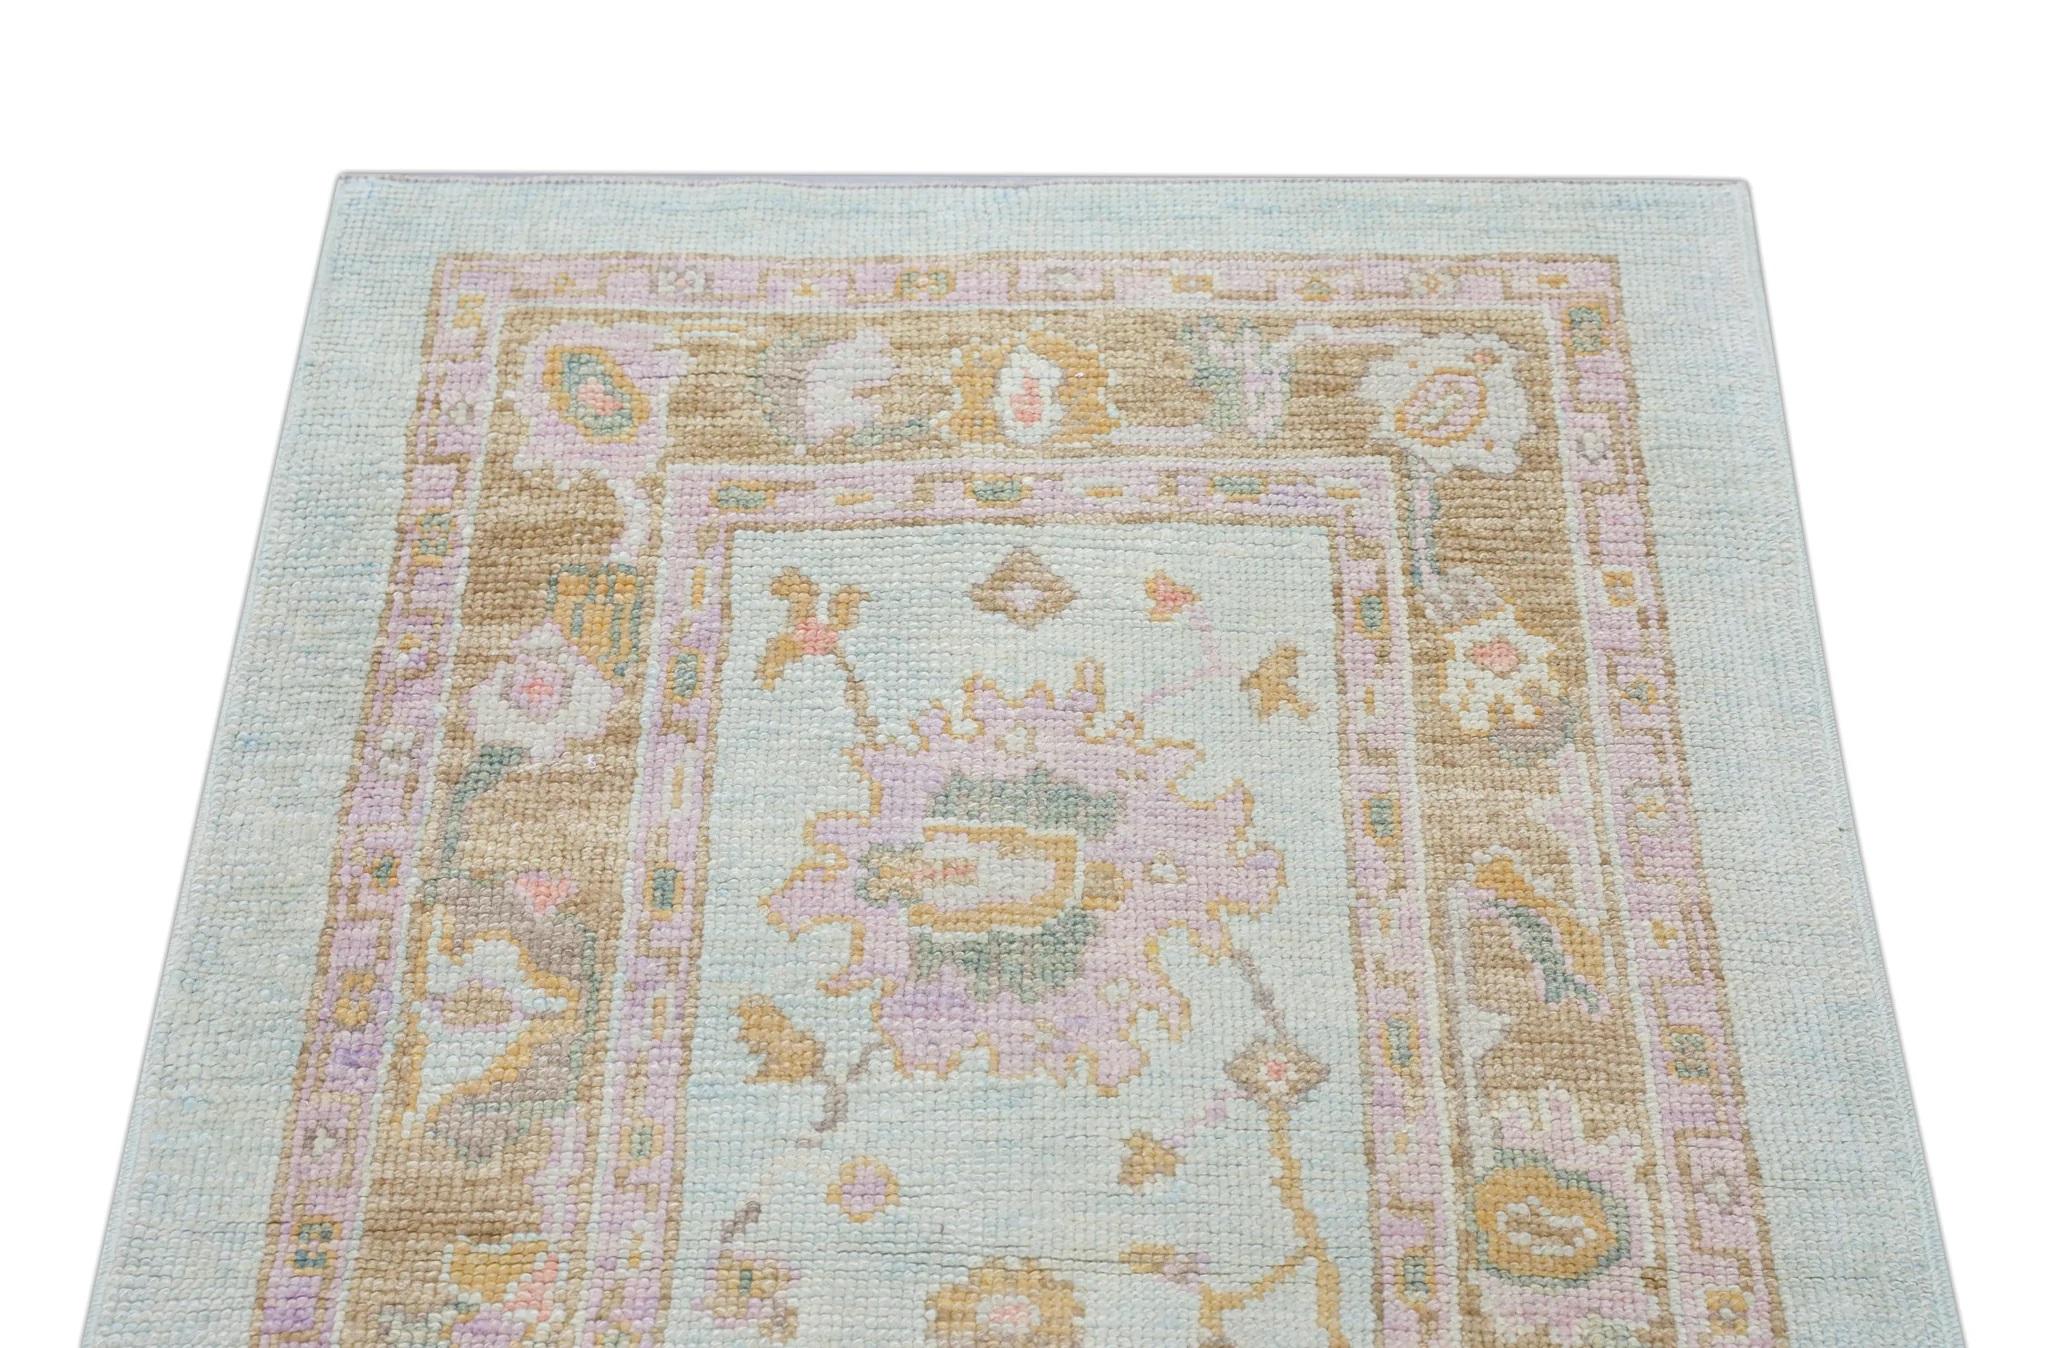 Soft Blue Handwoven Wool Turkish Oushak Rug with Colorful Floral Design 3' x 6'3 For Sale 2